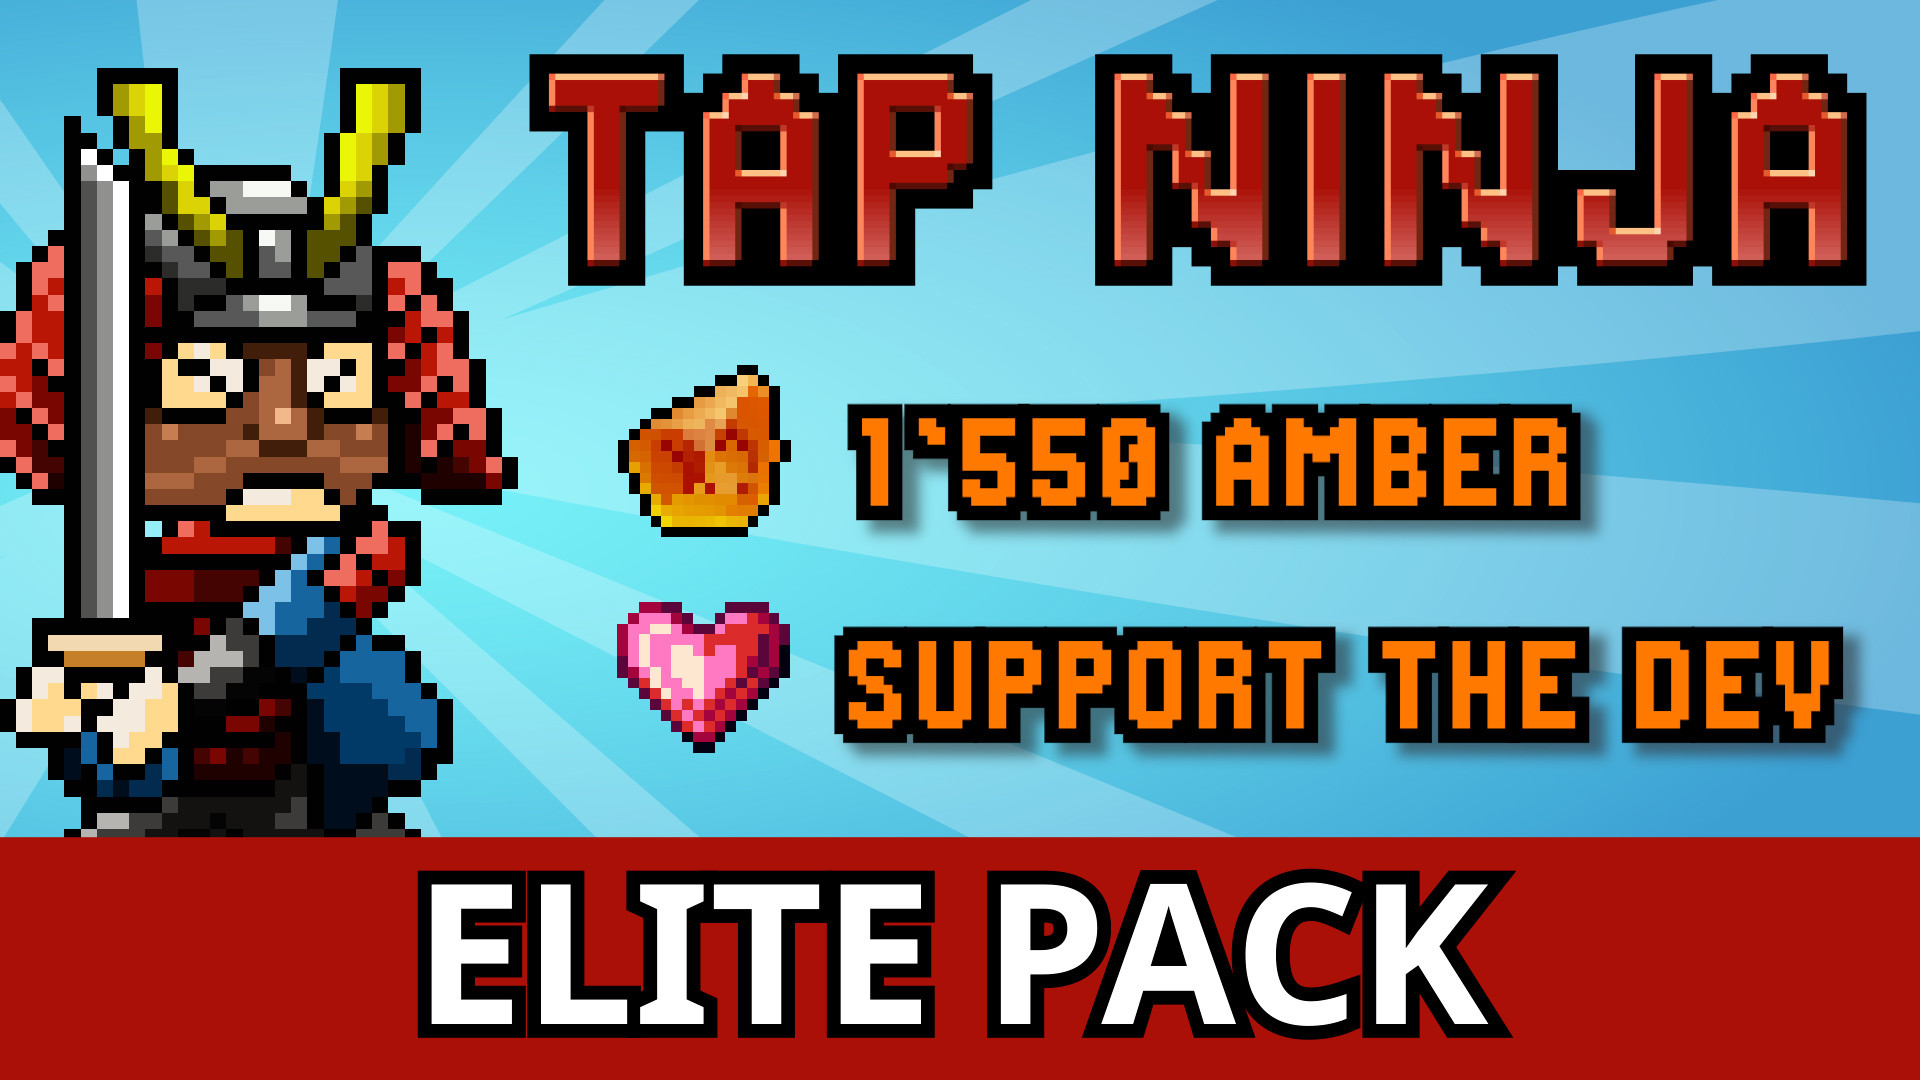 Tap Ninja - Idle Game on the App Store